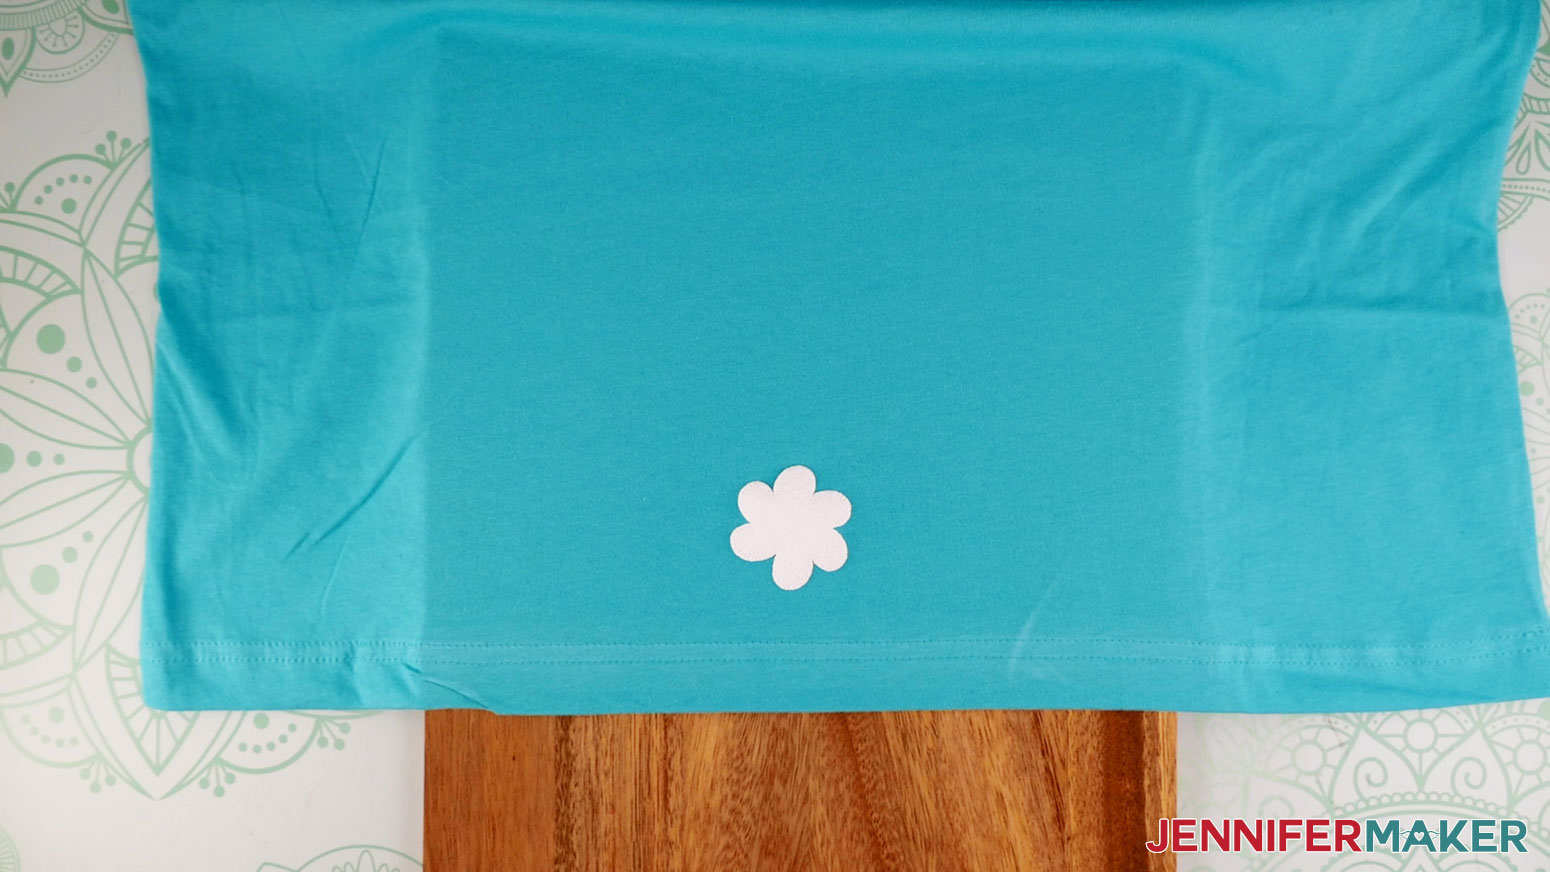 Learn how to use puff vinyl! Turquoise shirt with a flower test peeling and showing smooth puff vinyl texture.